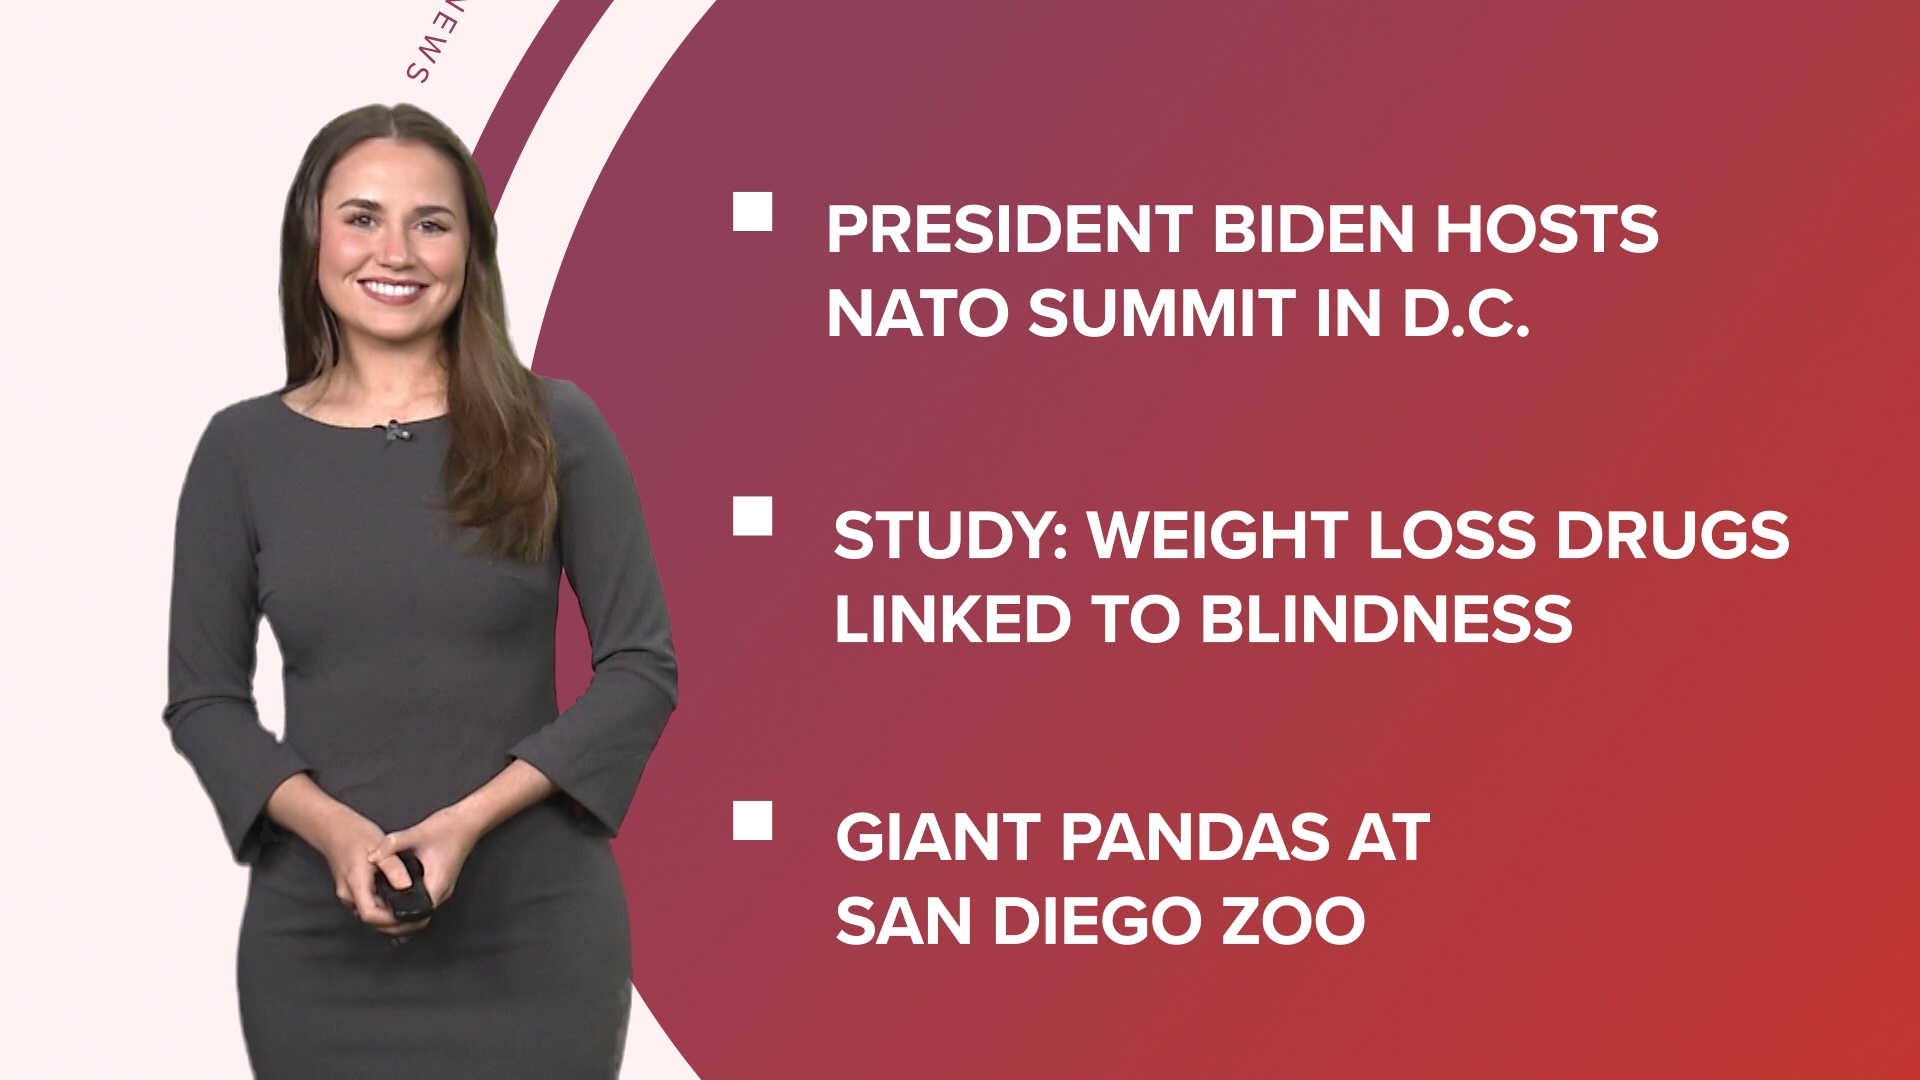 A look at what is happening in the news from President Biden hosting NATO summit in D.C. to new study on heat-related illnesses and pandas back at San Diego Zoo.